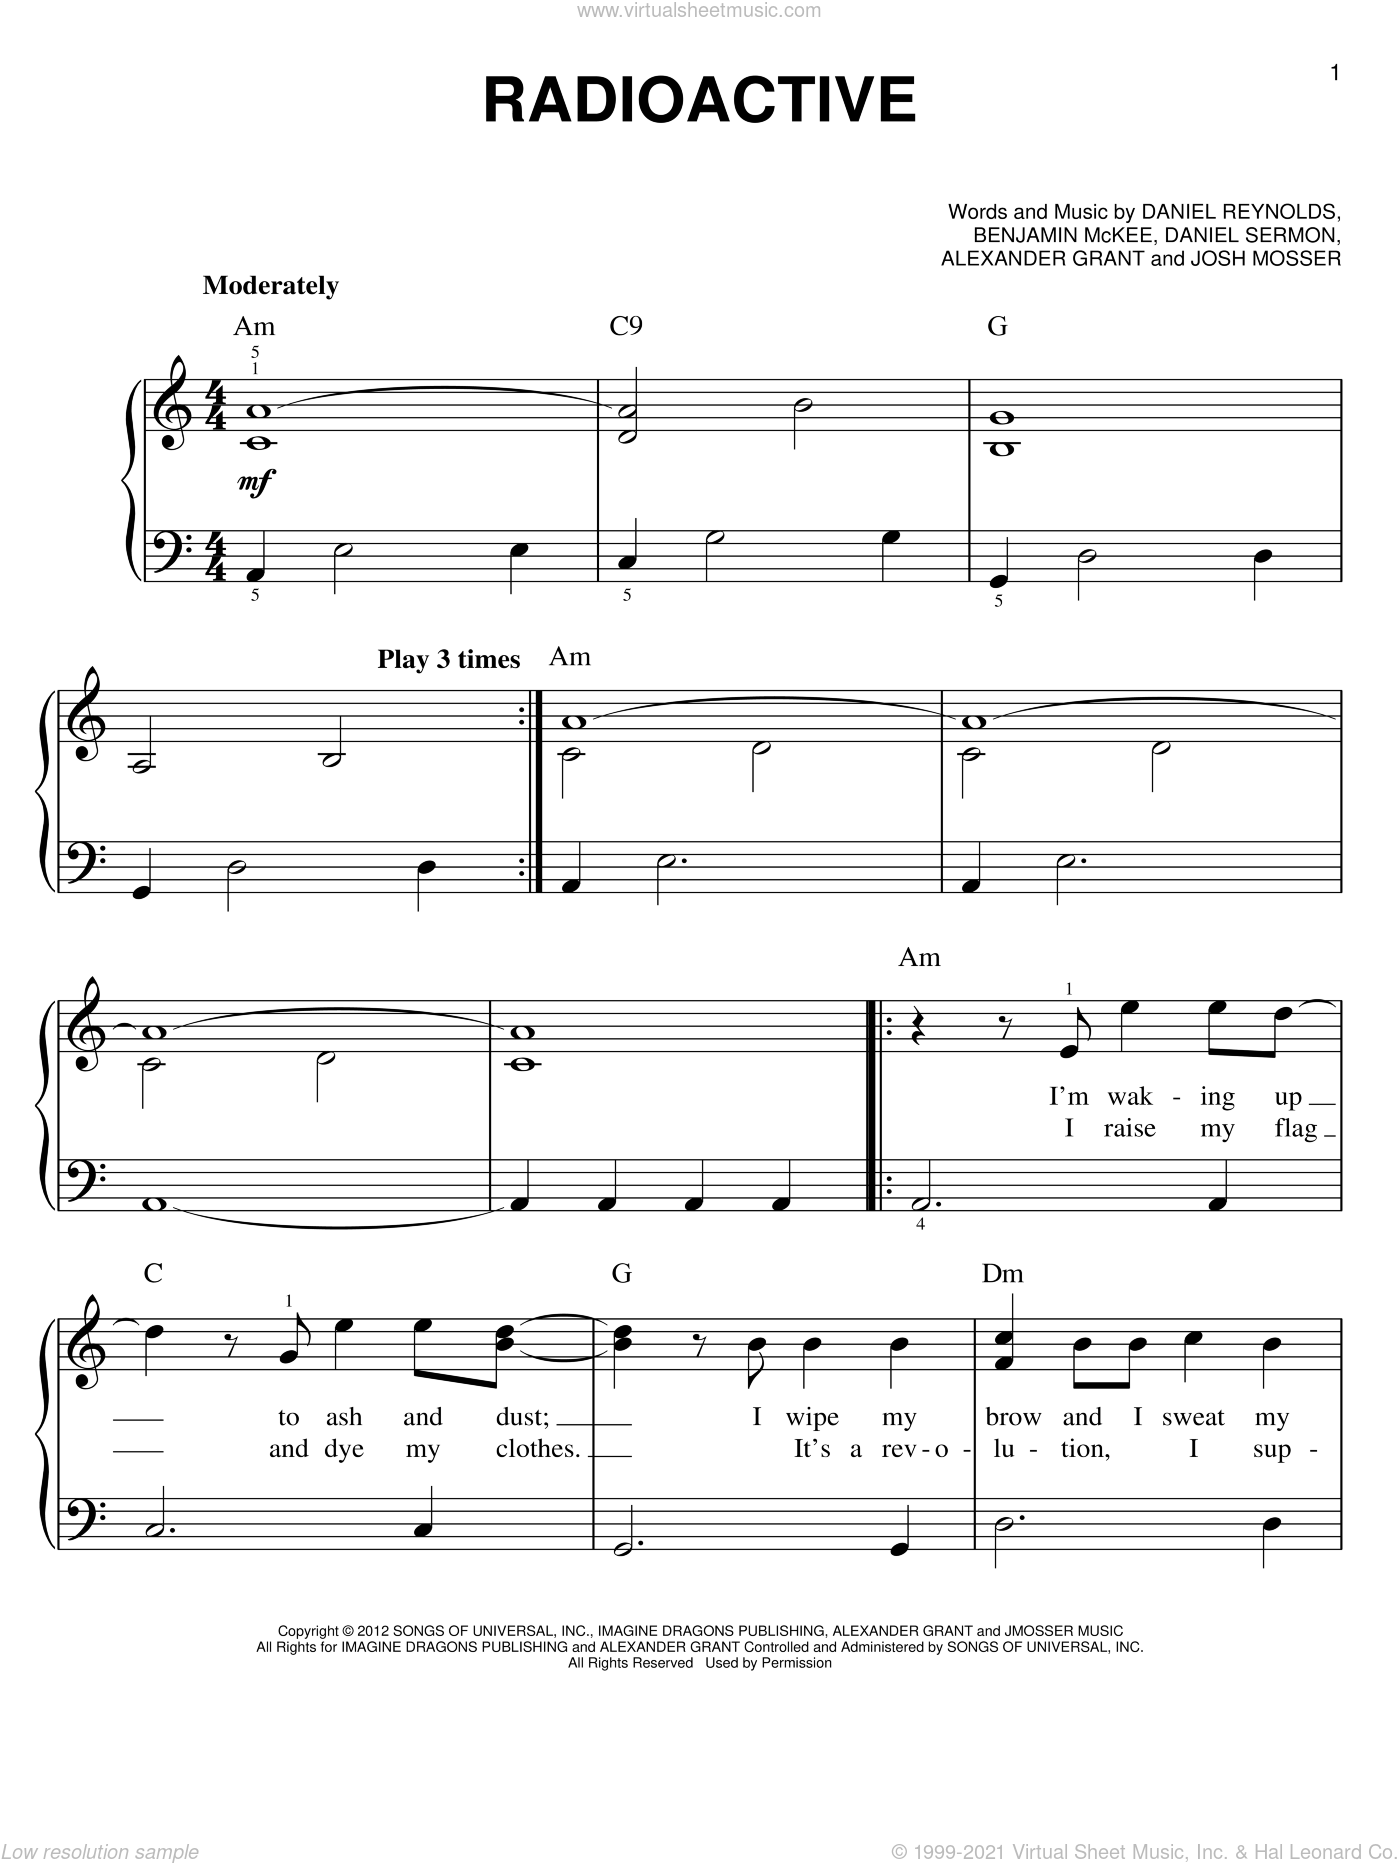 Dragons Radioactive Easy Sheet Music For Piano Solo Pdf